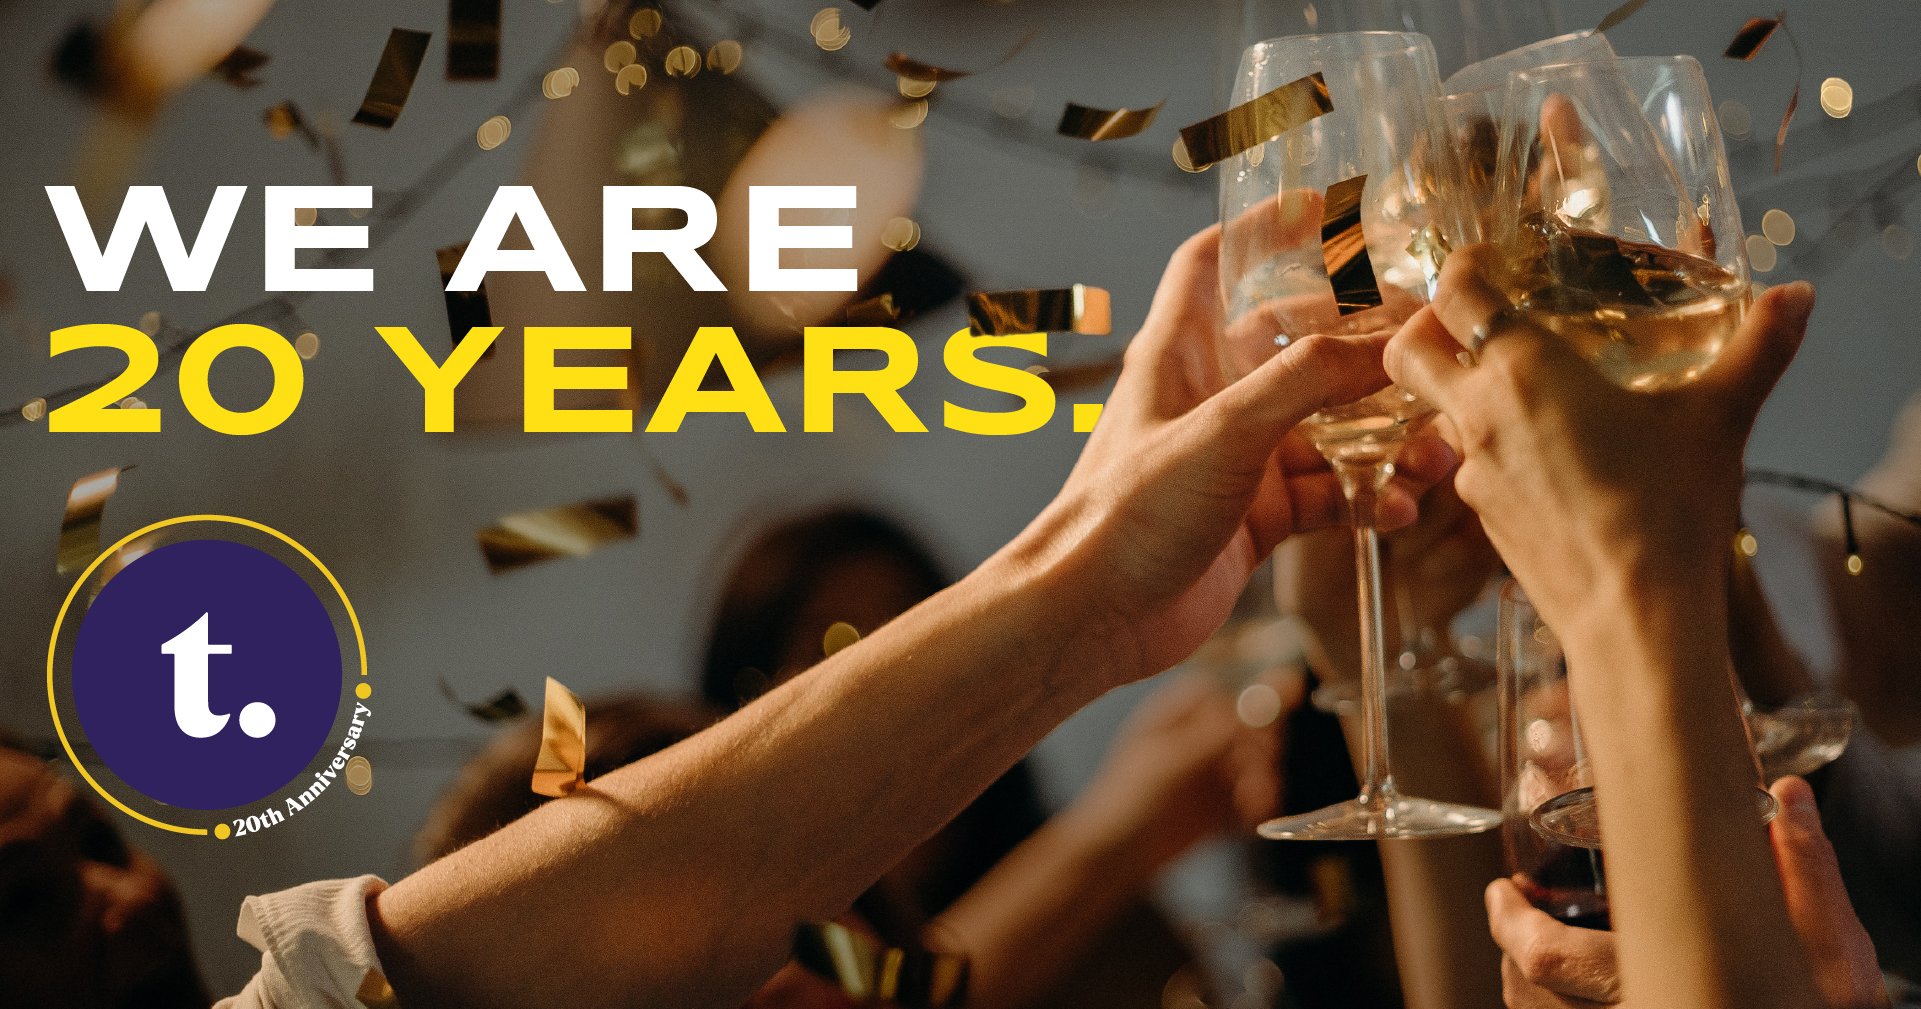 Image of hands toasting with glasses of champagne with the text "We are 20 years" on top of it.